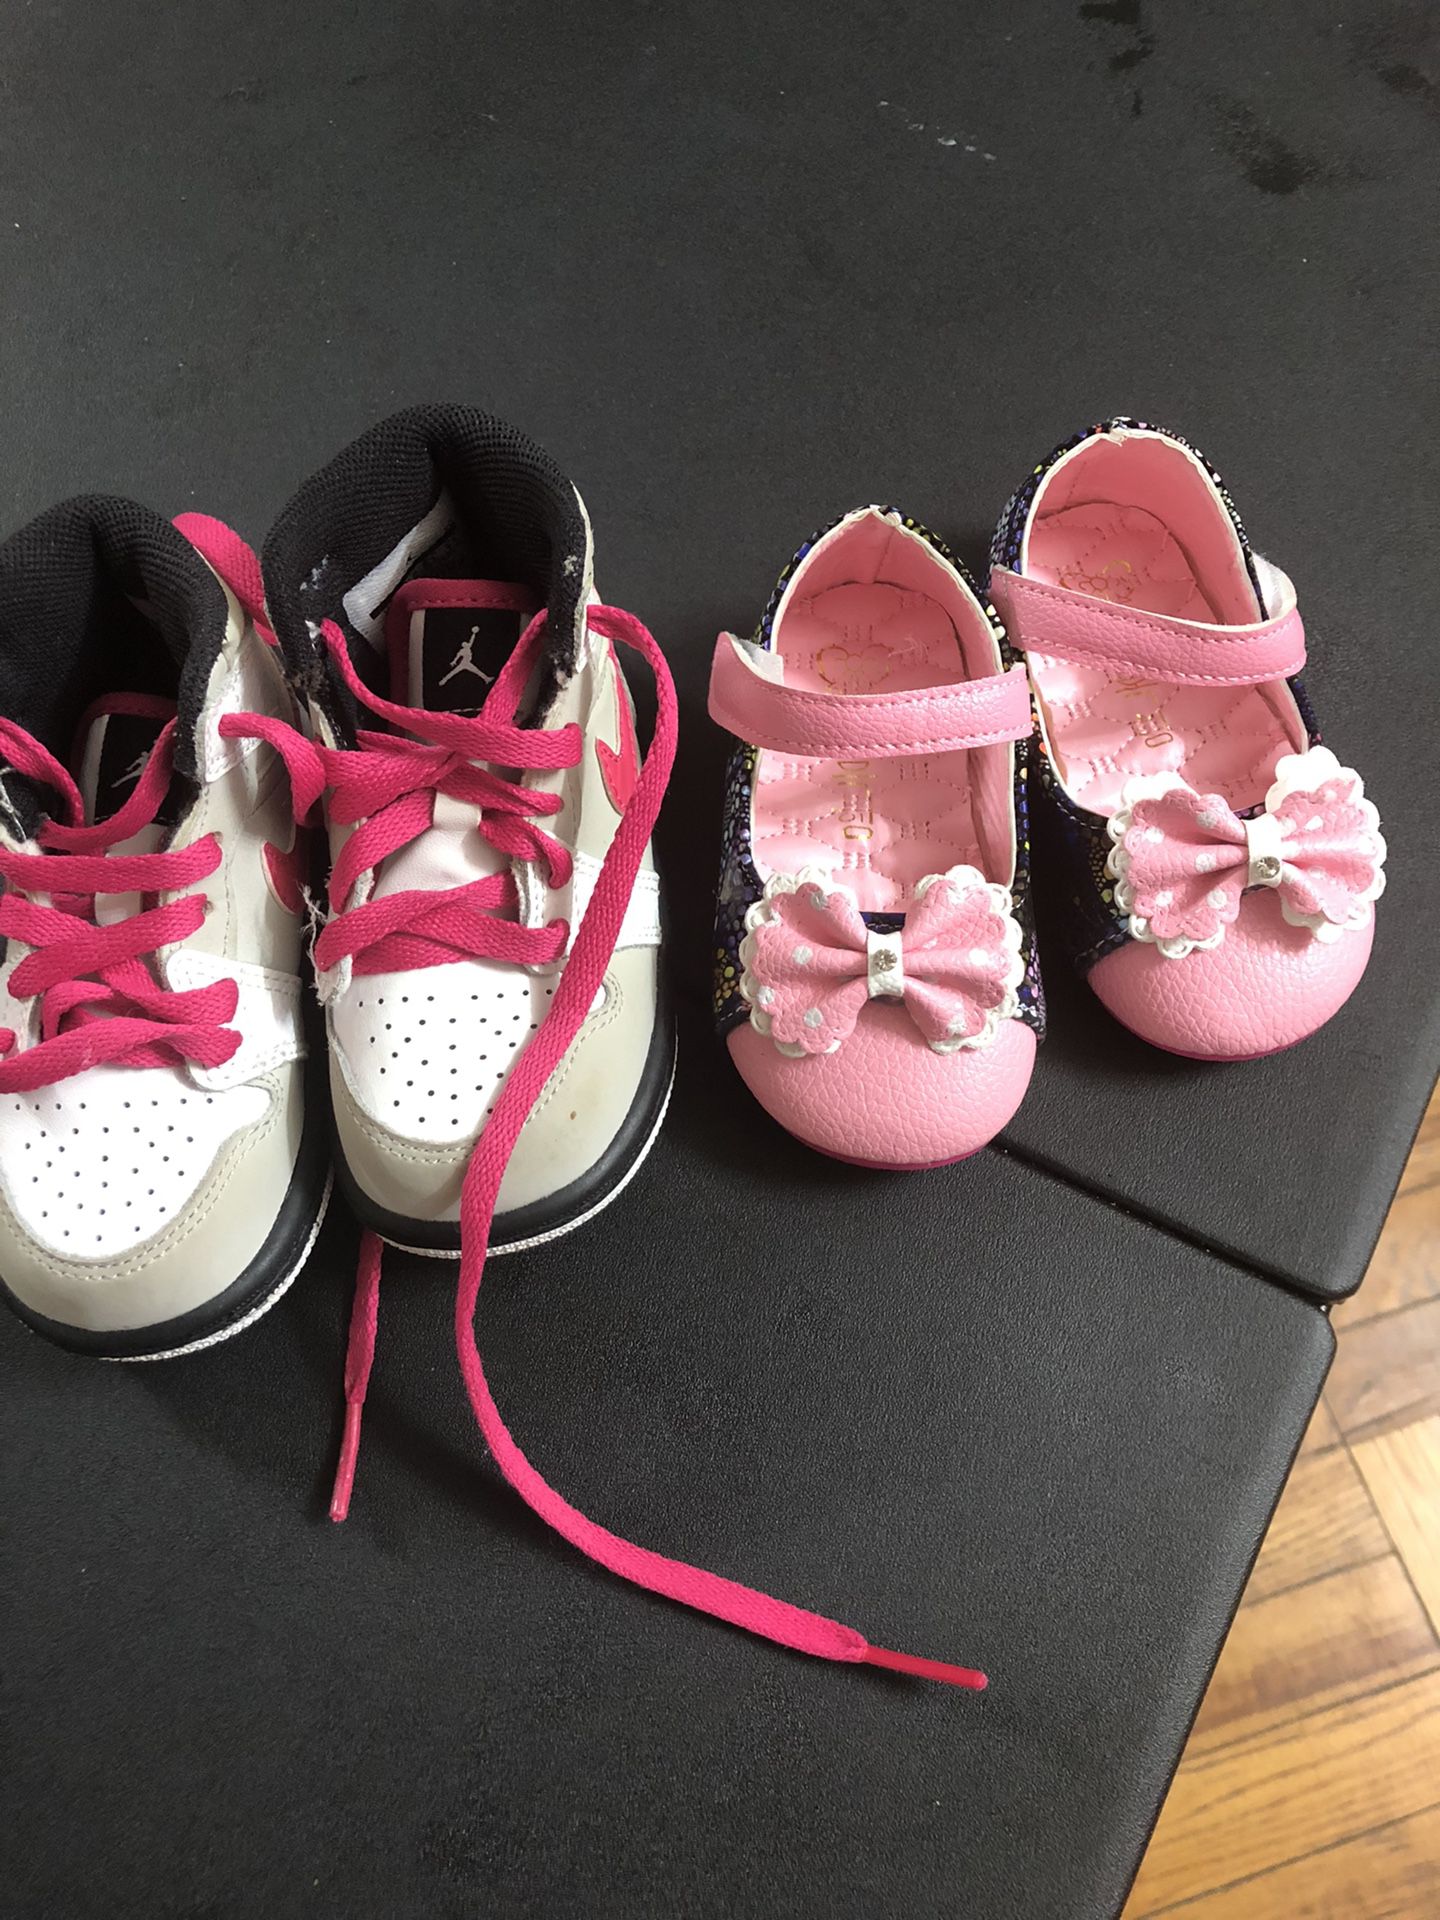 Baby girl shoes both shoes $10